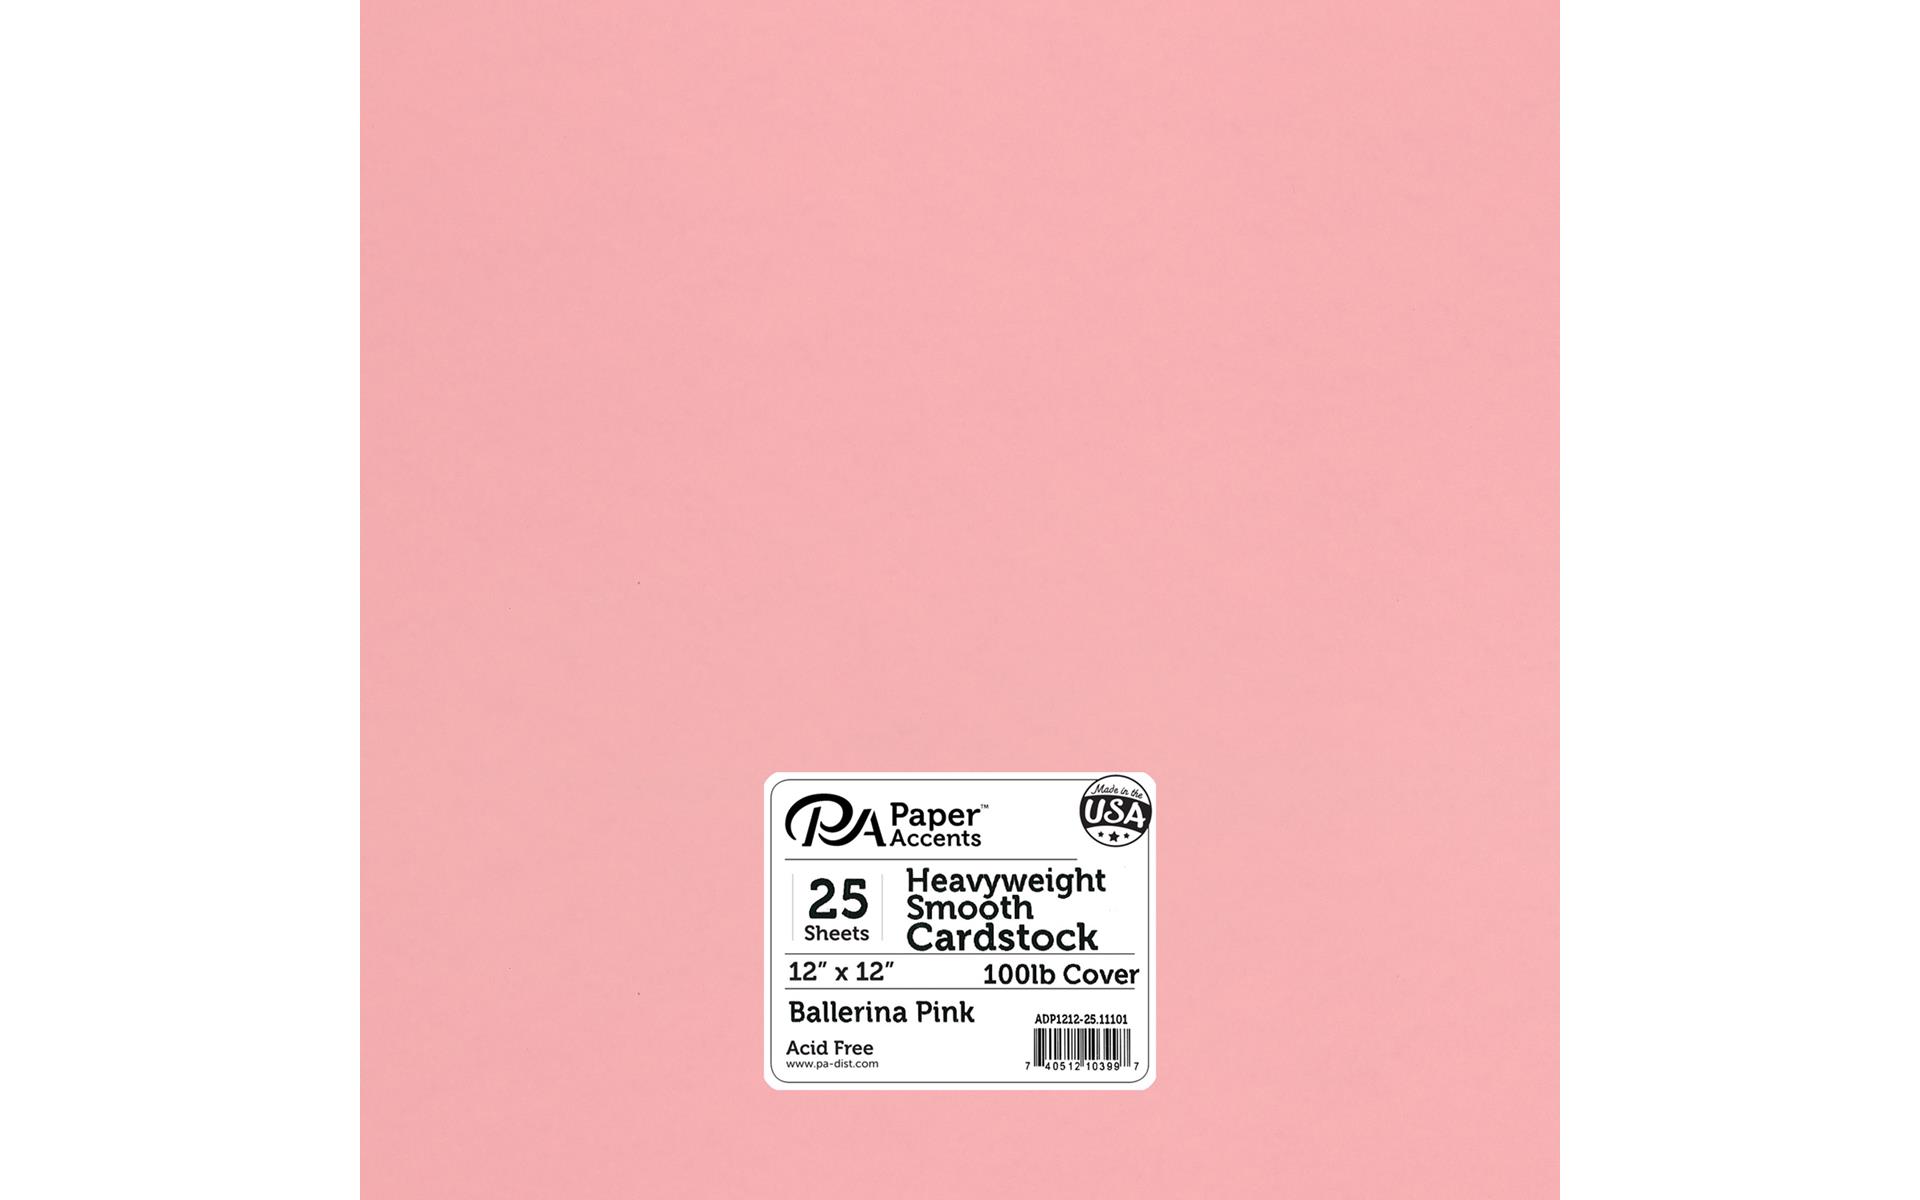 PA Paper Accents Heavyweight Smooth Cardstock 12 x 12 Ballerina Pink,  100lb colored cardstock paper for card making, scrapbooking, printing